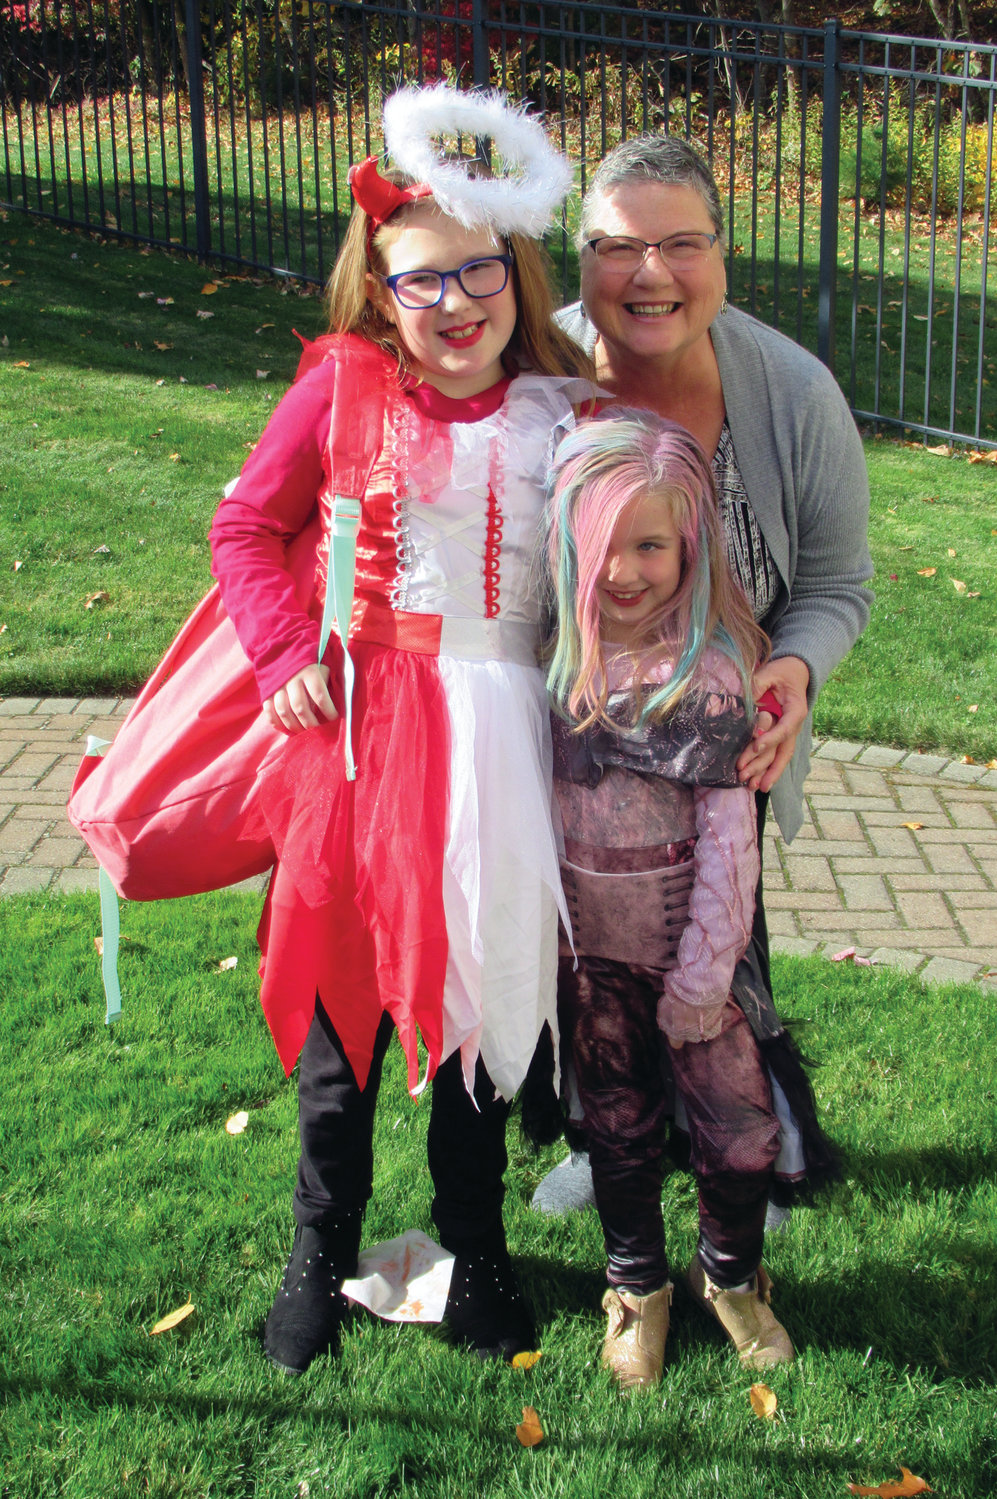 FAMILY FUN: Above, Carol March brought her grandchildren Morgan Harris and Liv Rose to Briarcliffe Manor Saturday so they could show off their classic costumes to their great-grandfather, Vinny DiDinato.